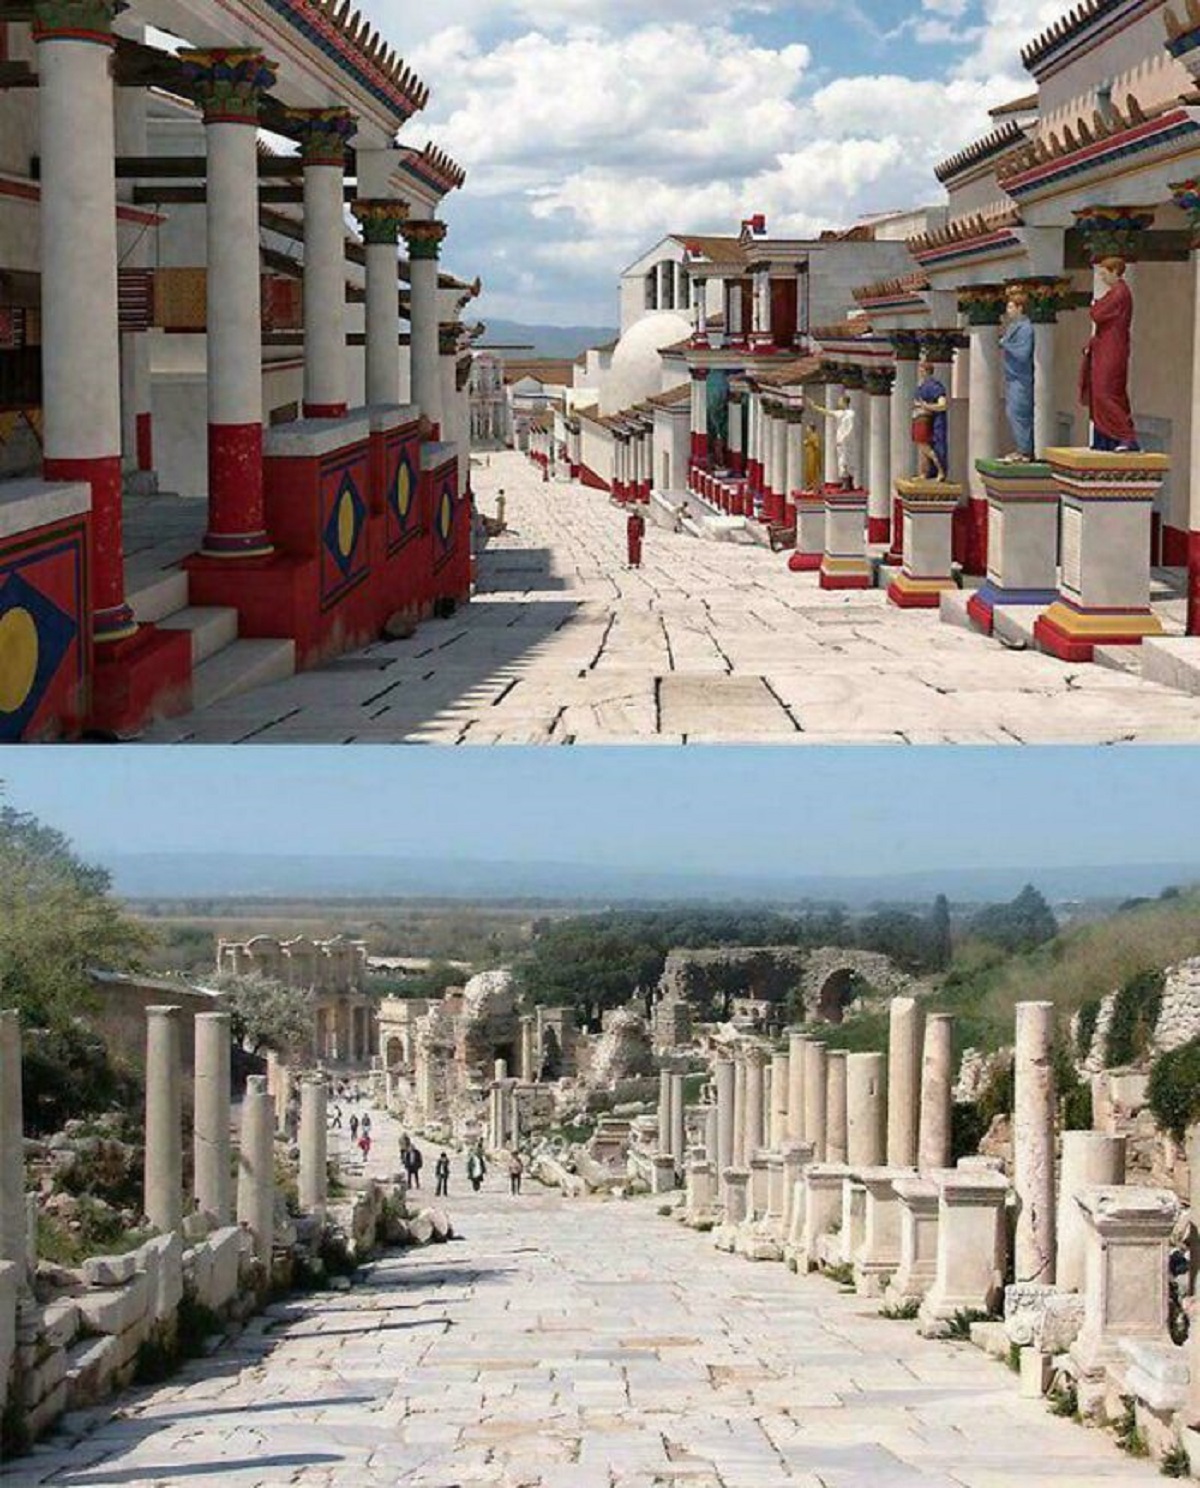 This Is How Ancient Greece Really Looked Like. Here's A Reconstruction Of Curetes Street In Ancient Ephesus